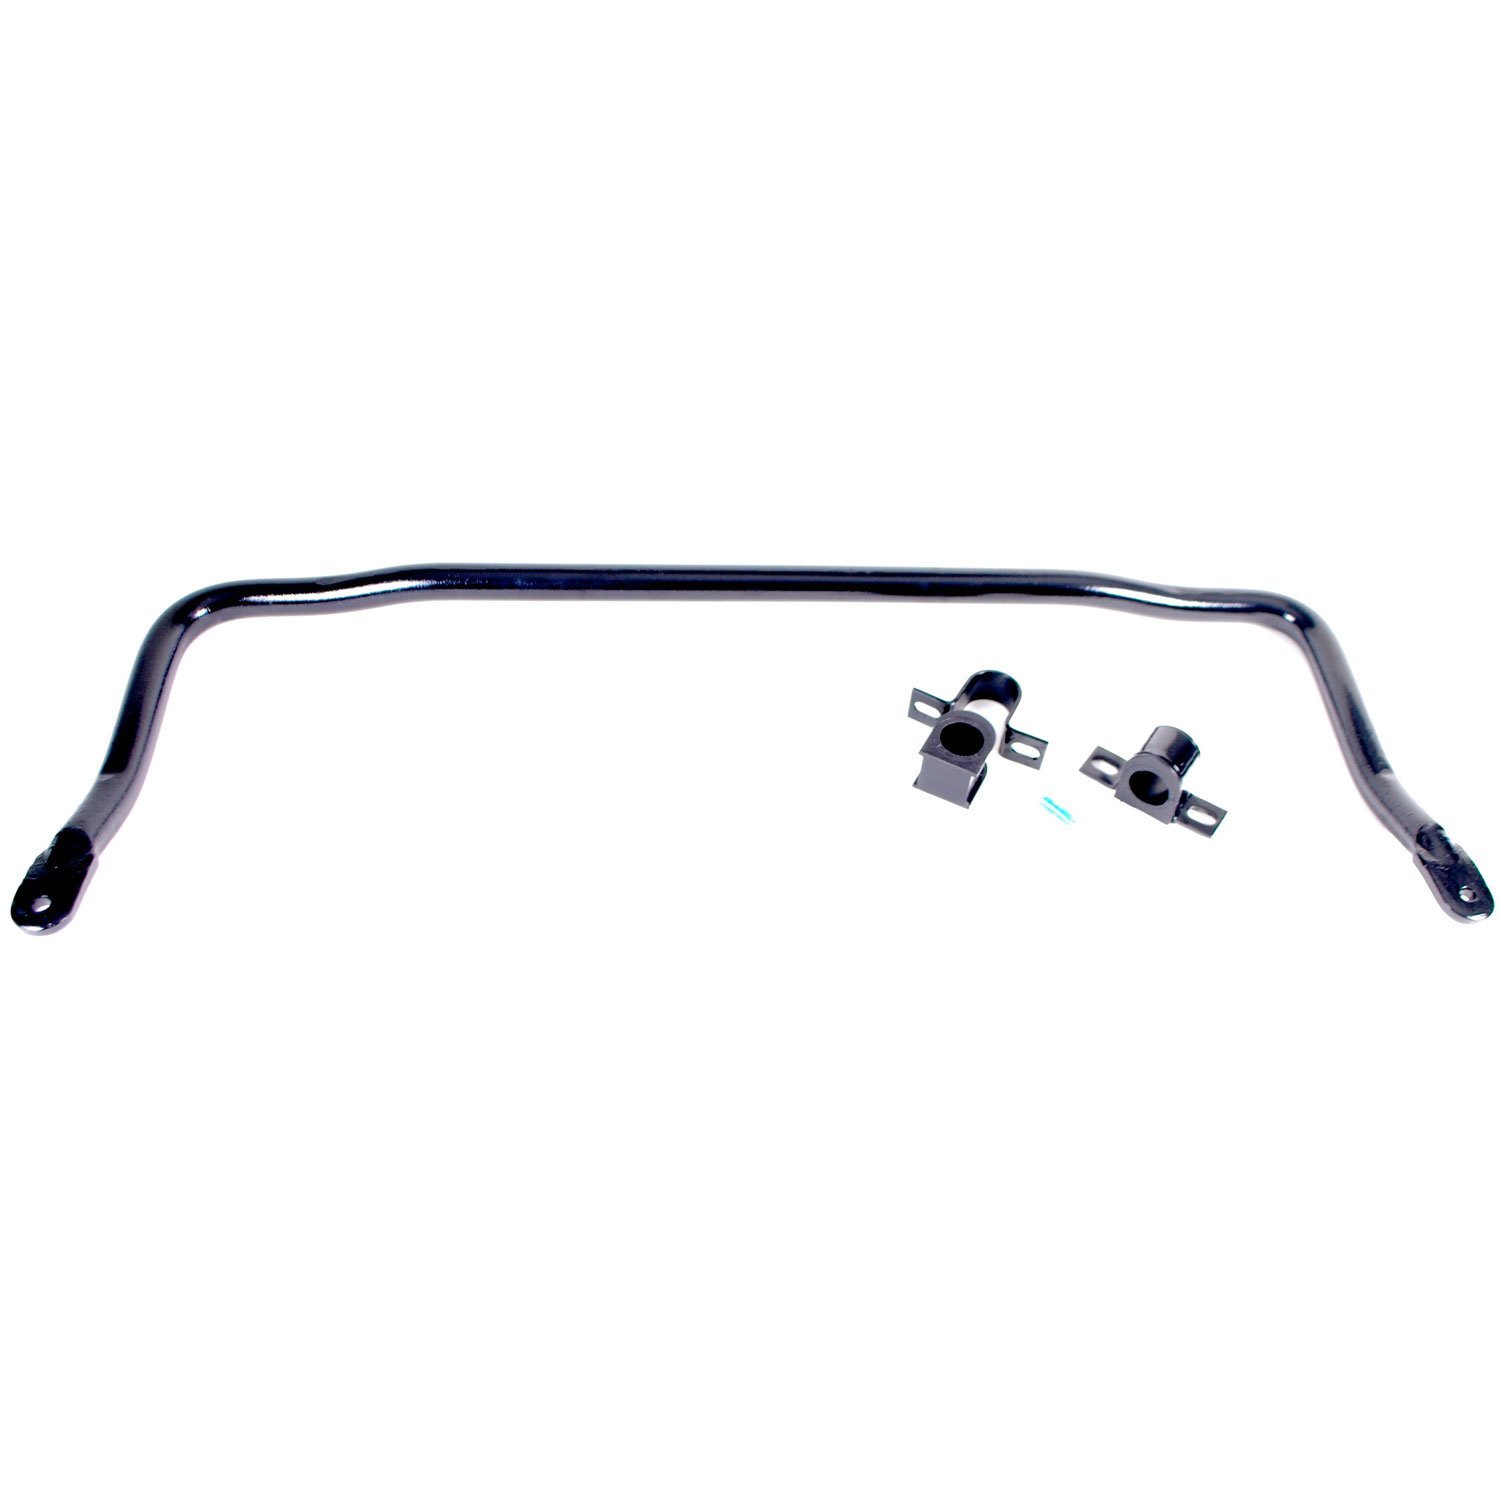 Front Sway Bar for 2011-2015 Ford F-450/F-550 Super Duty